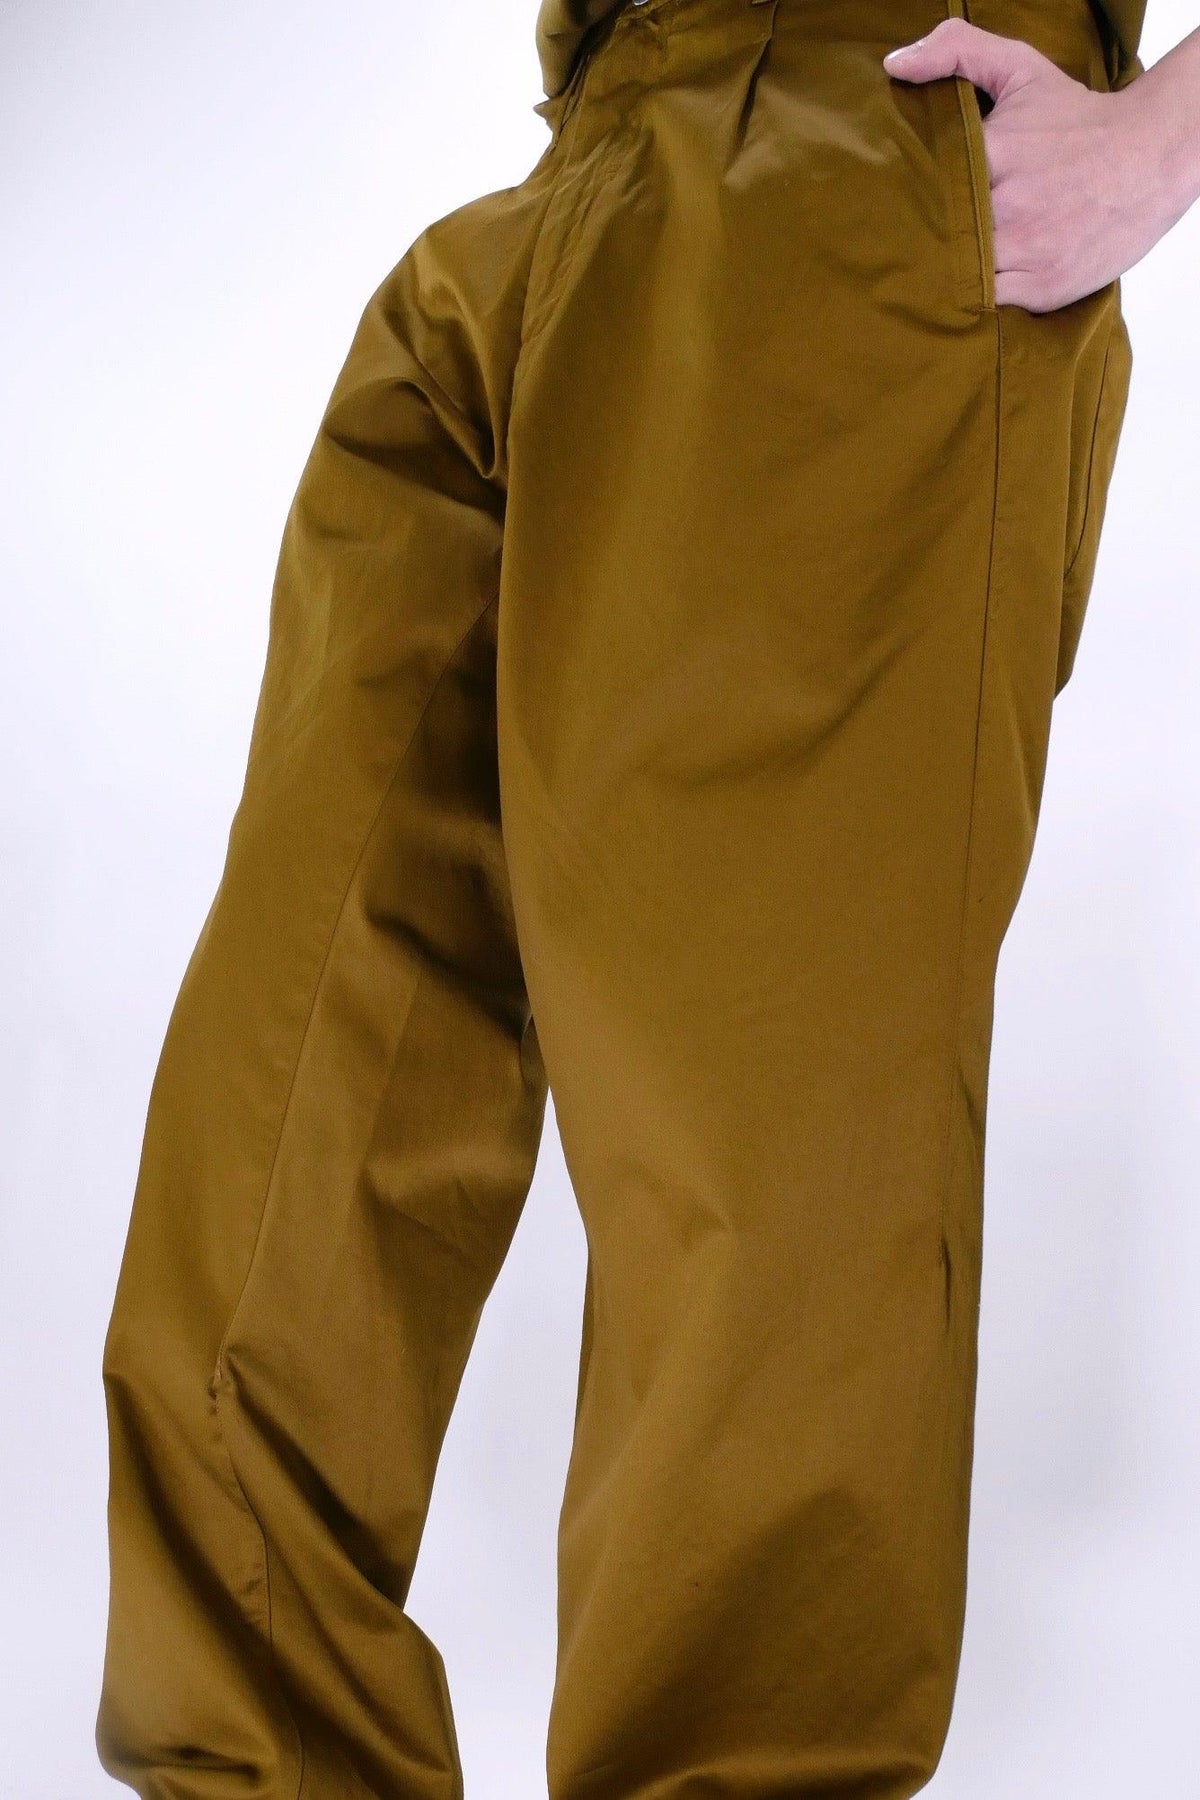 Stone Island Shadow Project 30108 Cotton Satin Pants - Tobacco - Due West